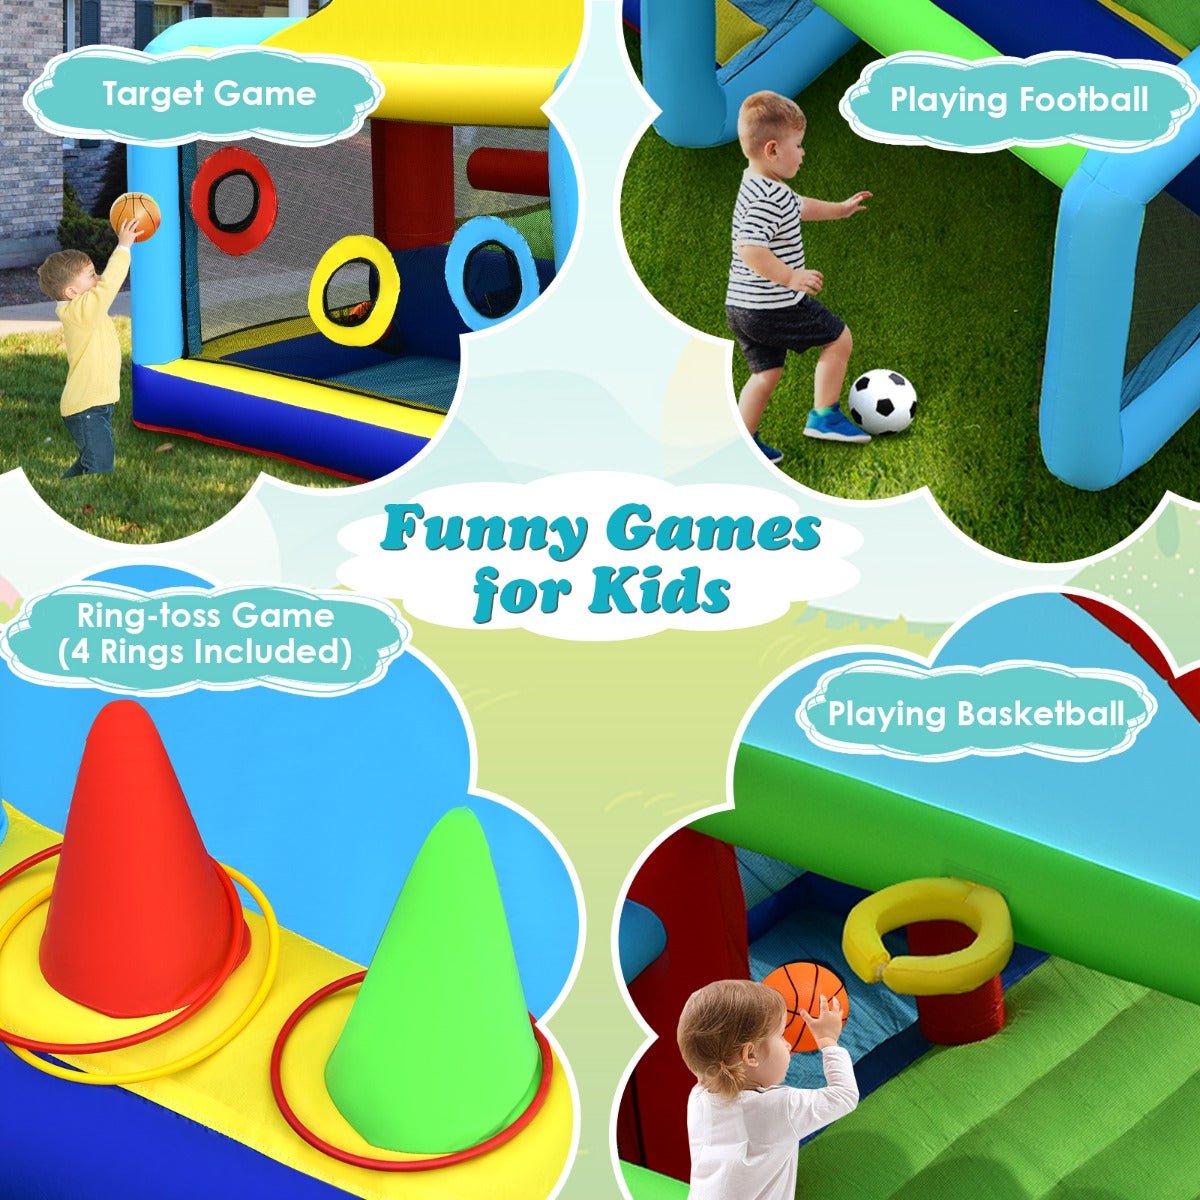 Children's Bounce House Inflatable - Dual Slides & Jumping Area (Blower Included)